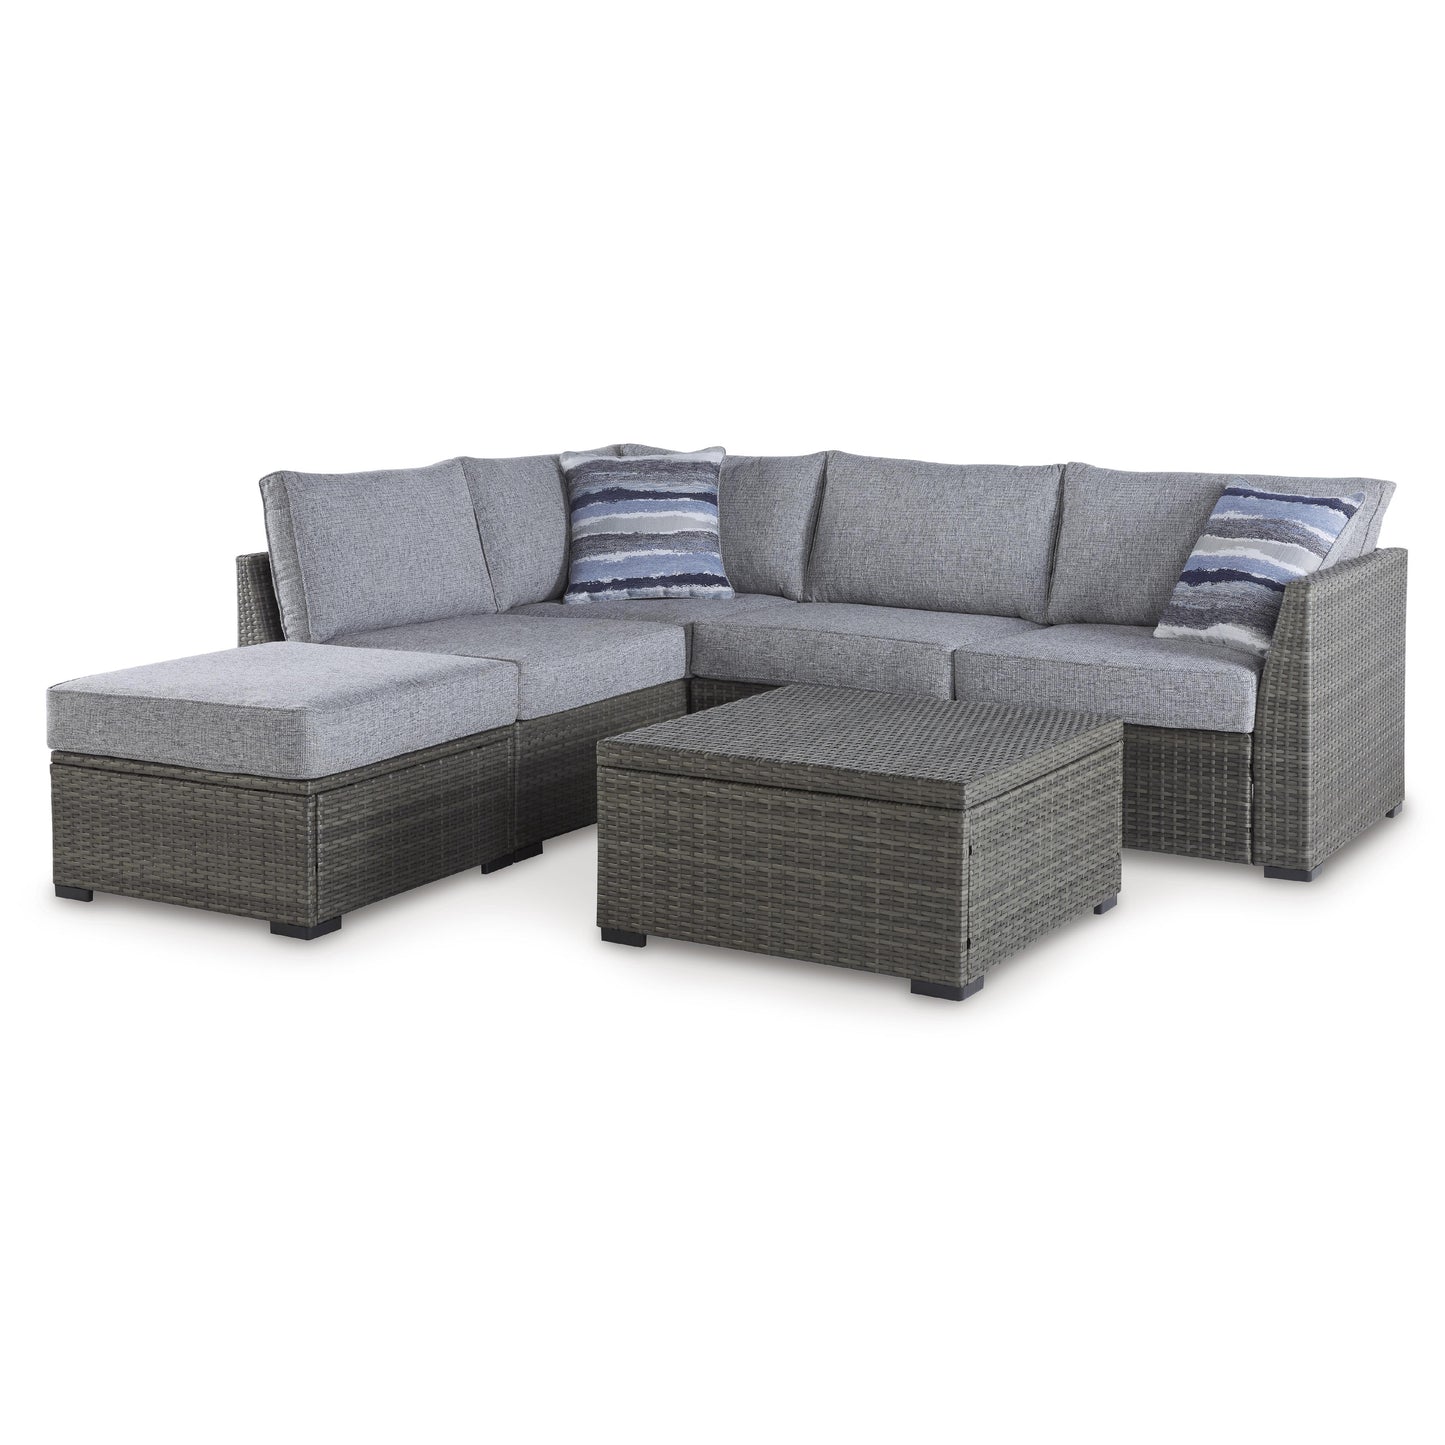 Signature Design by Ashley Outdoor Seating Sets P297-070 IMAGE 1